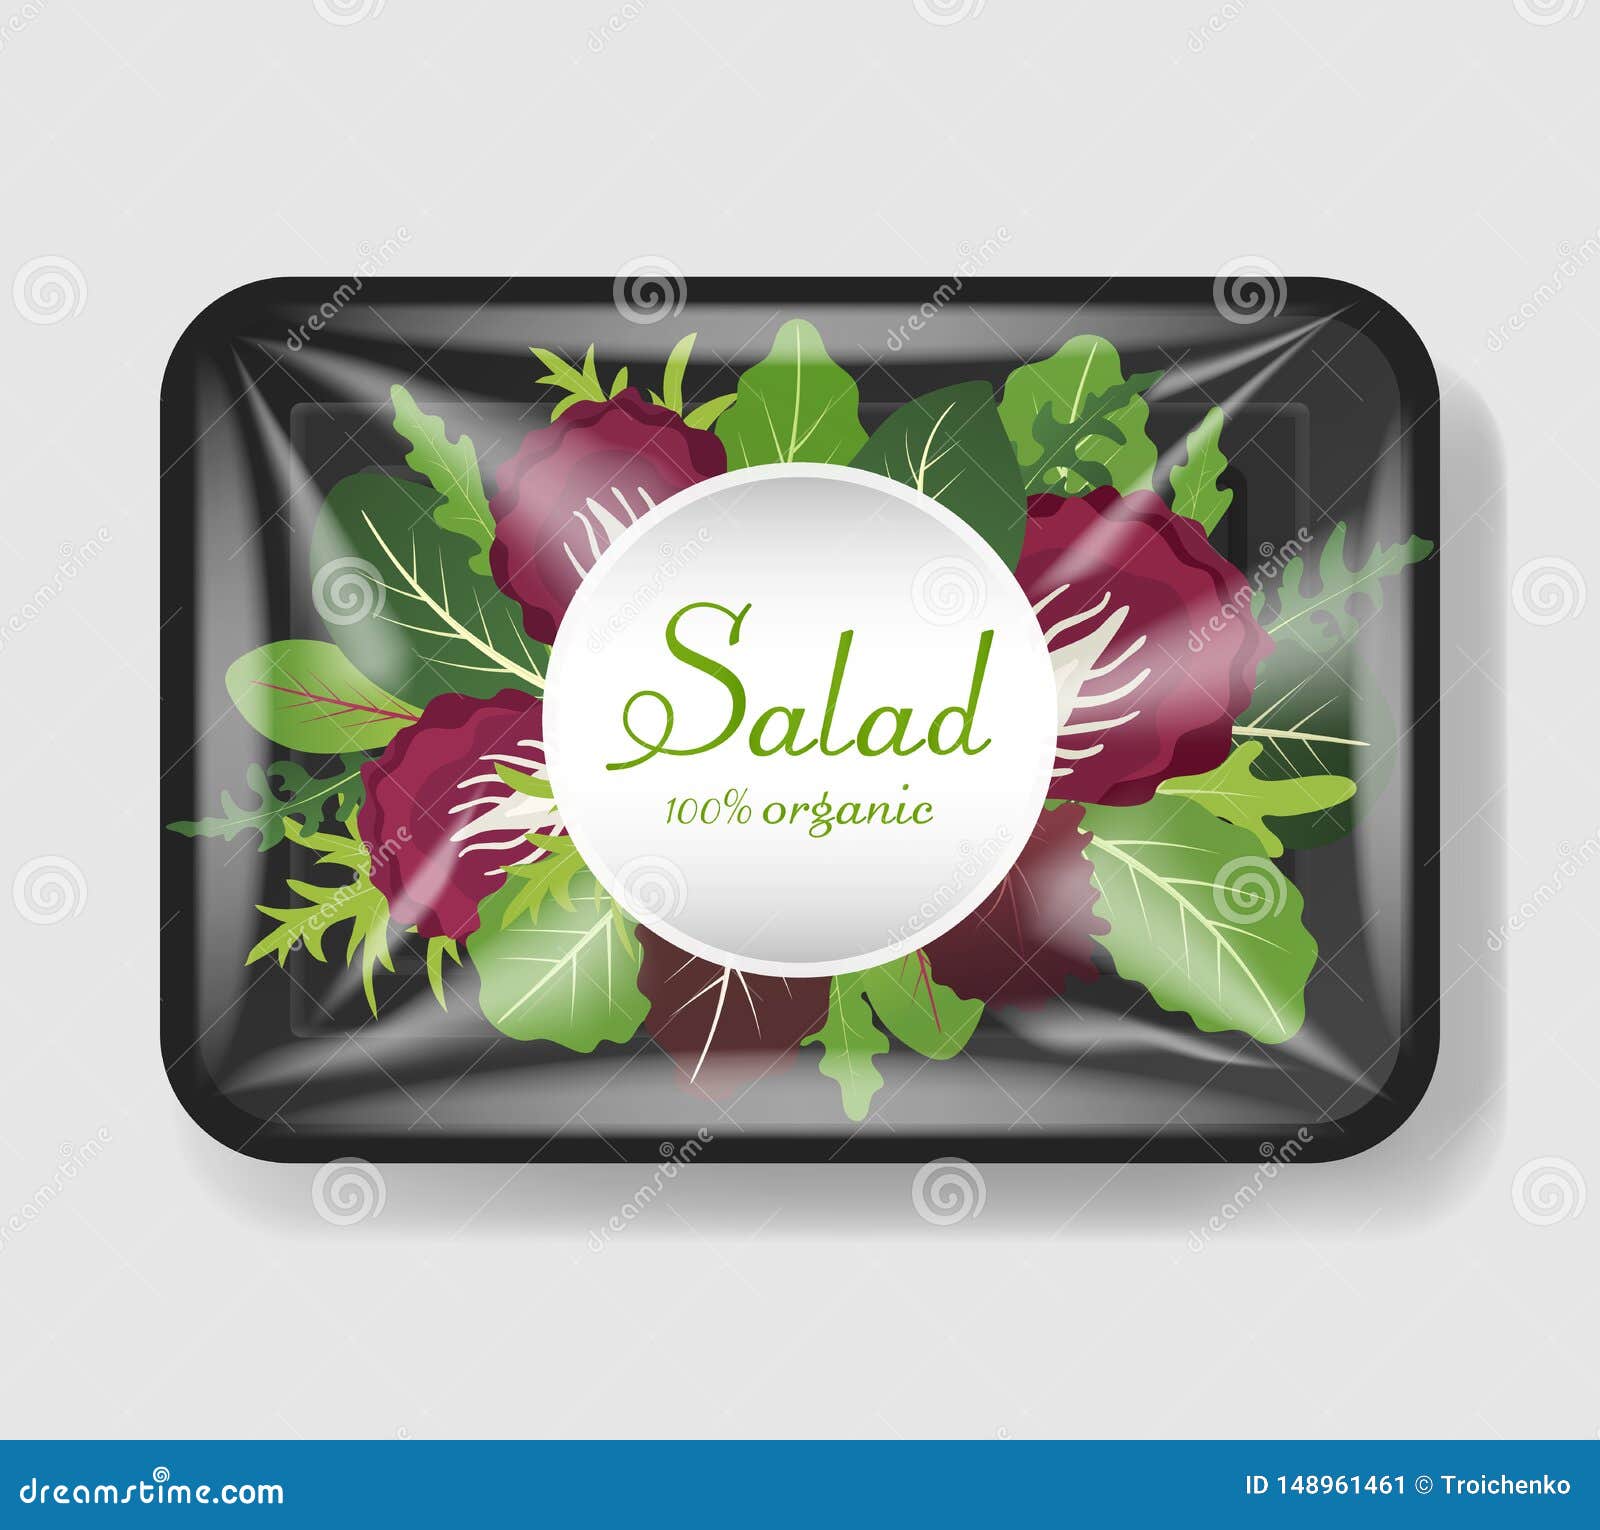 Download Mix Of Salad Leaves In Plastic Tray Container With Cellophane Cover. Mockup Template For Your ...